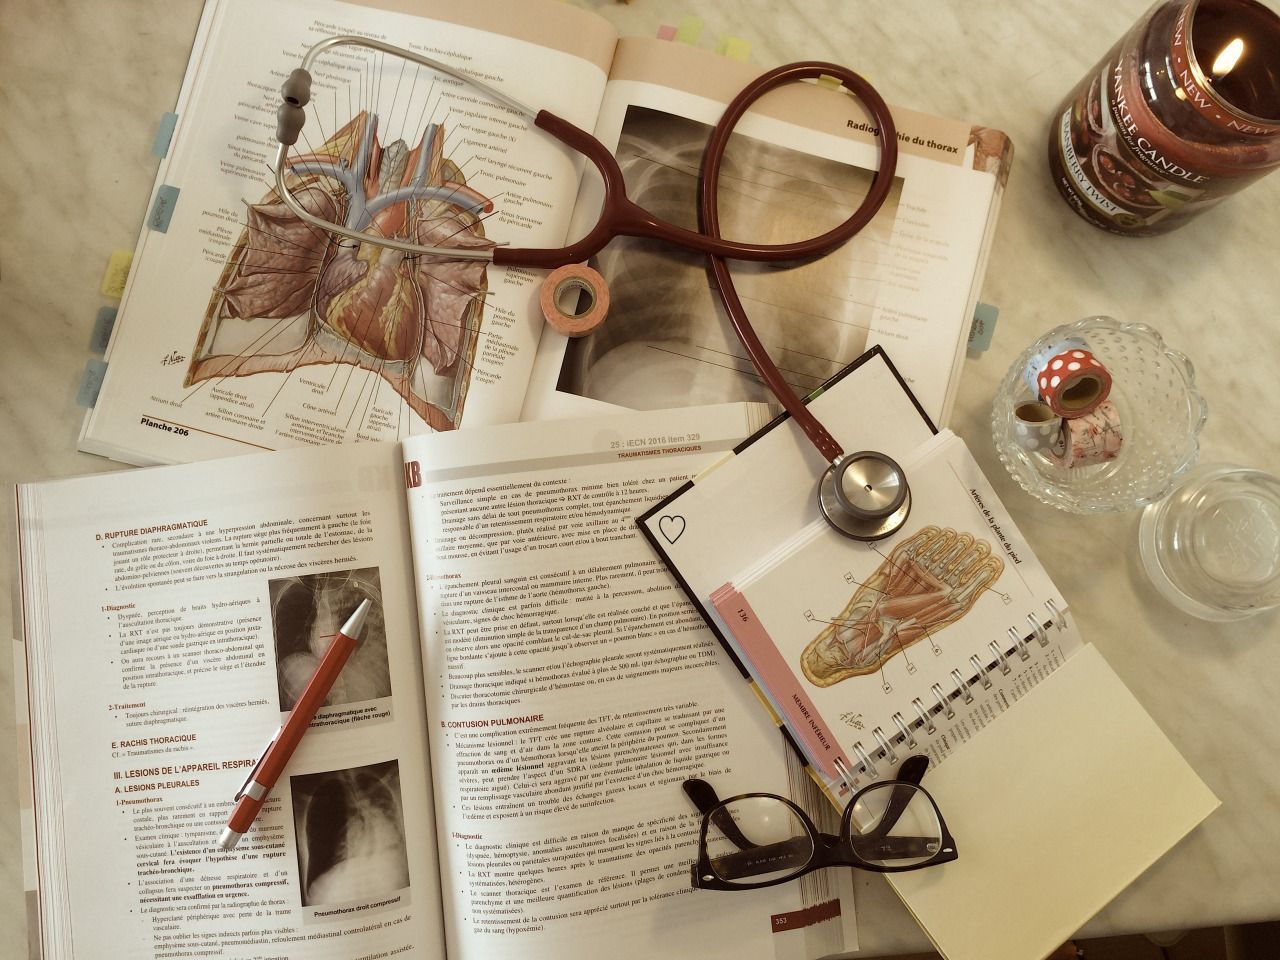 Open book with medical diagrams and a stethoscope on top - Nurse, medical